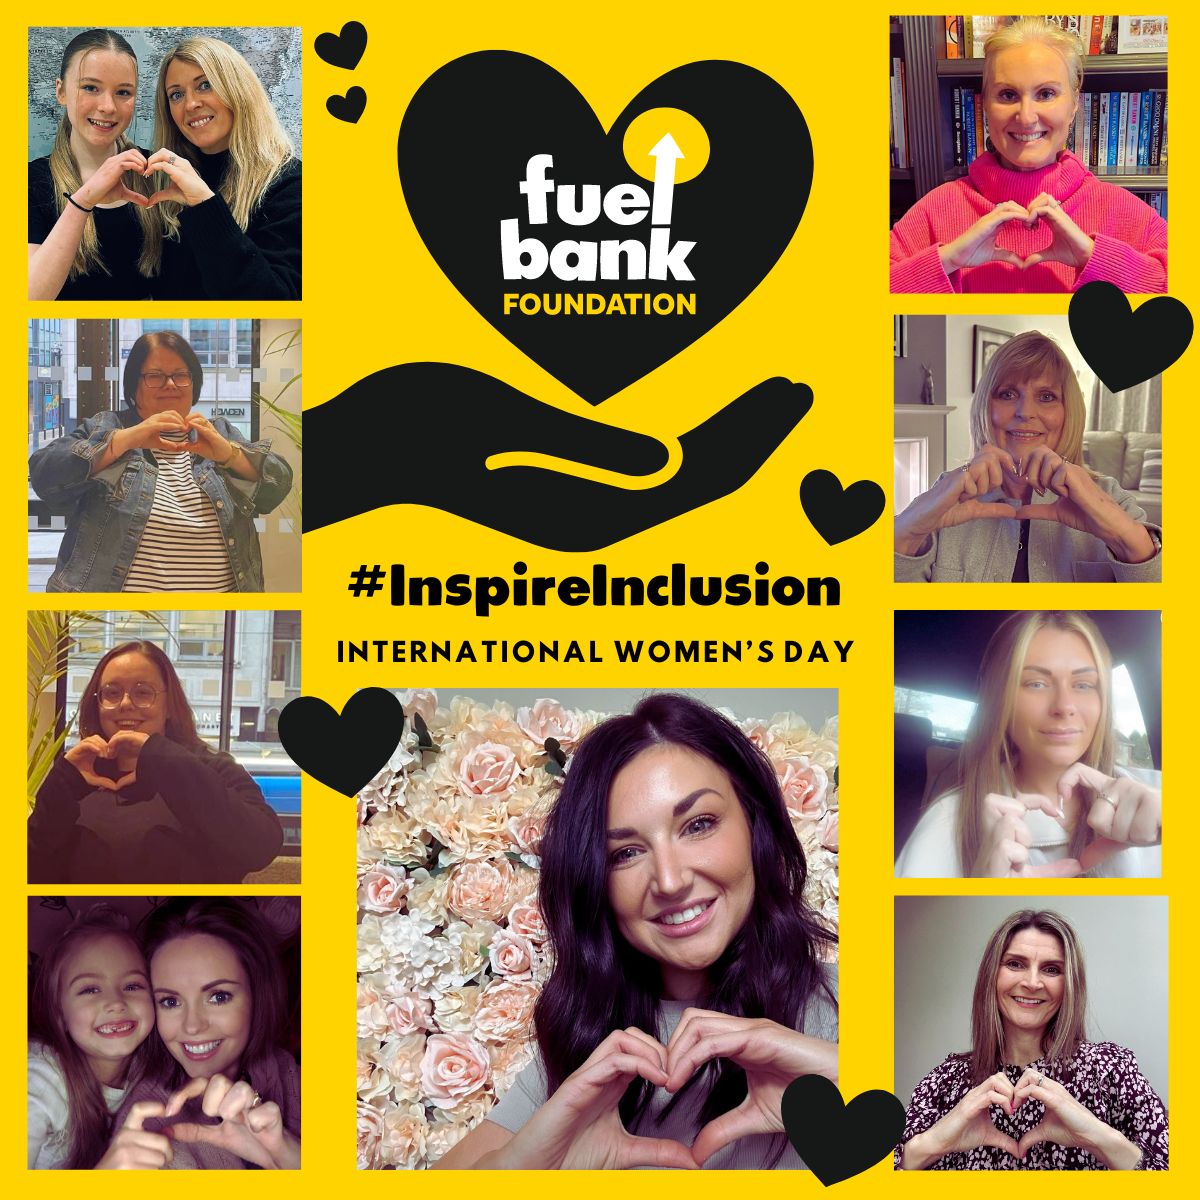 Fuel Bank Foundation supports #IWD2024 by embracing diversity, empowerment and equality in the workplace. We #InspireInclusion through: ✅ Recruiting, retaining & developing diverse talent ✅ Supporting women into leadership roles ✅ Supporting women's health & wellbeing